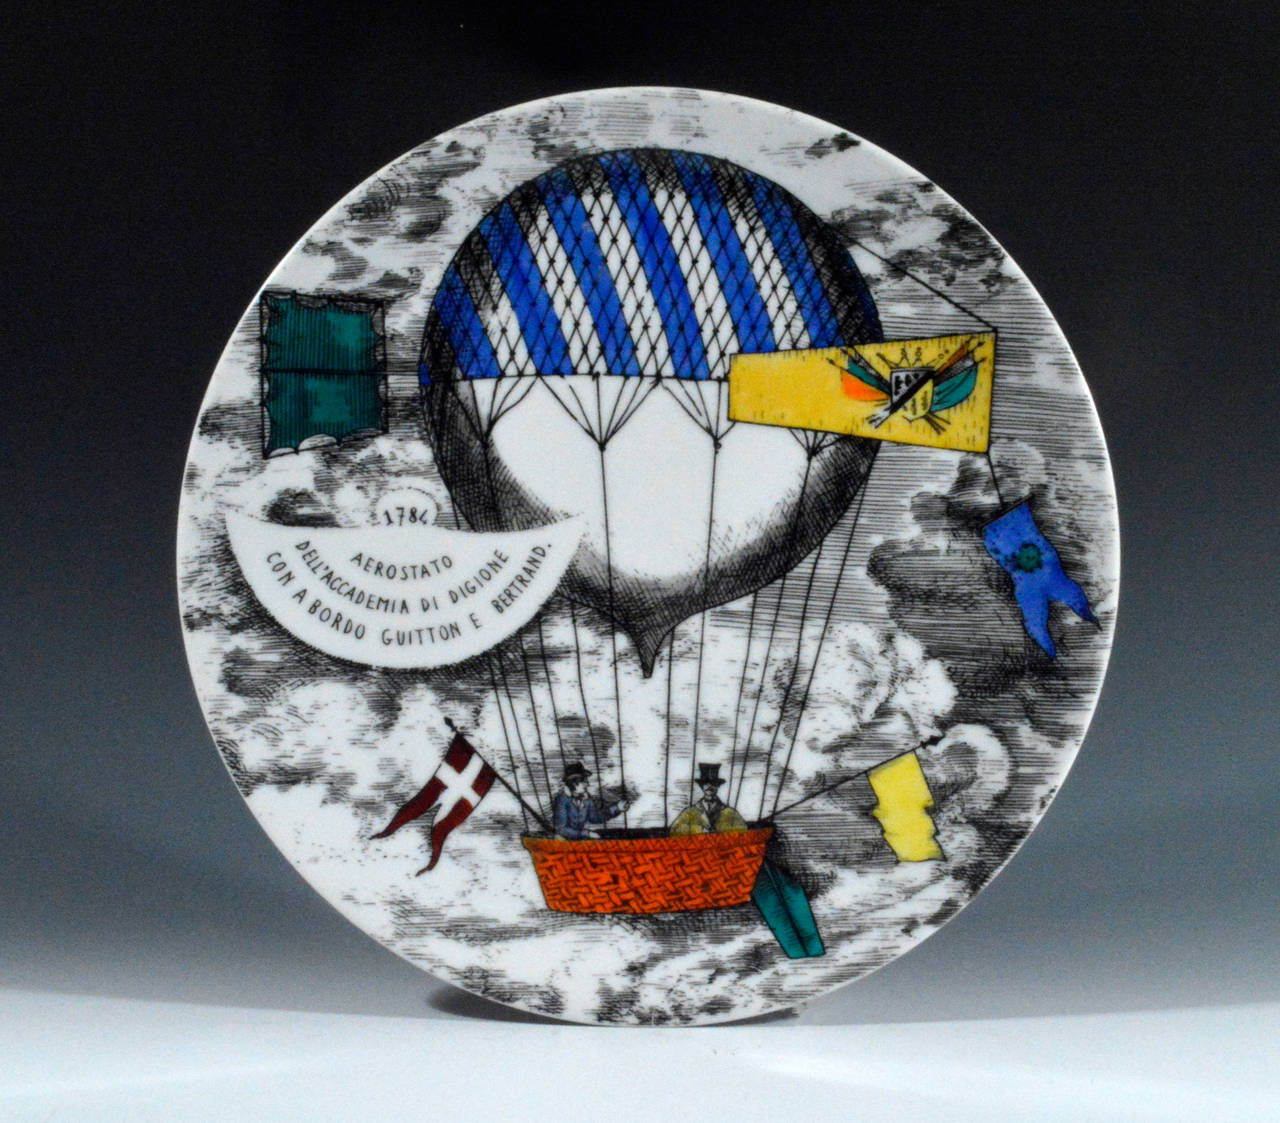 Mid-Century Modern Piero Fornasetti Porcelain Plates with the Mongolfiere (Hot Air) Design